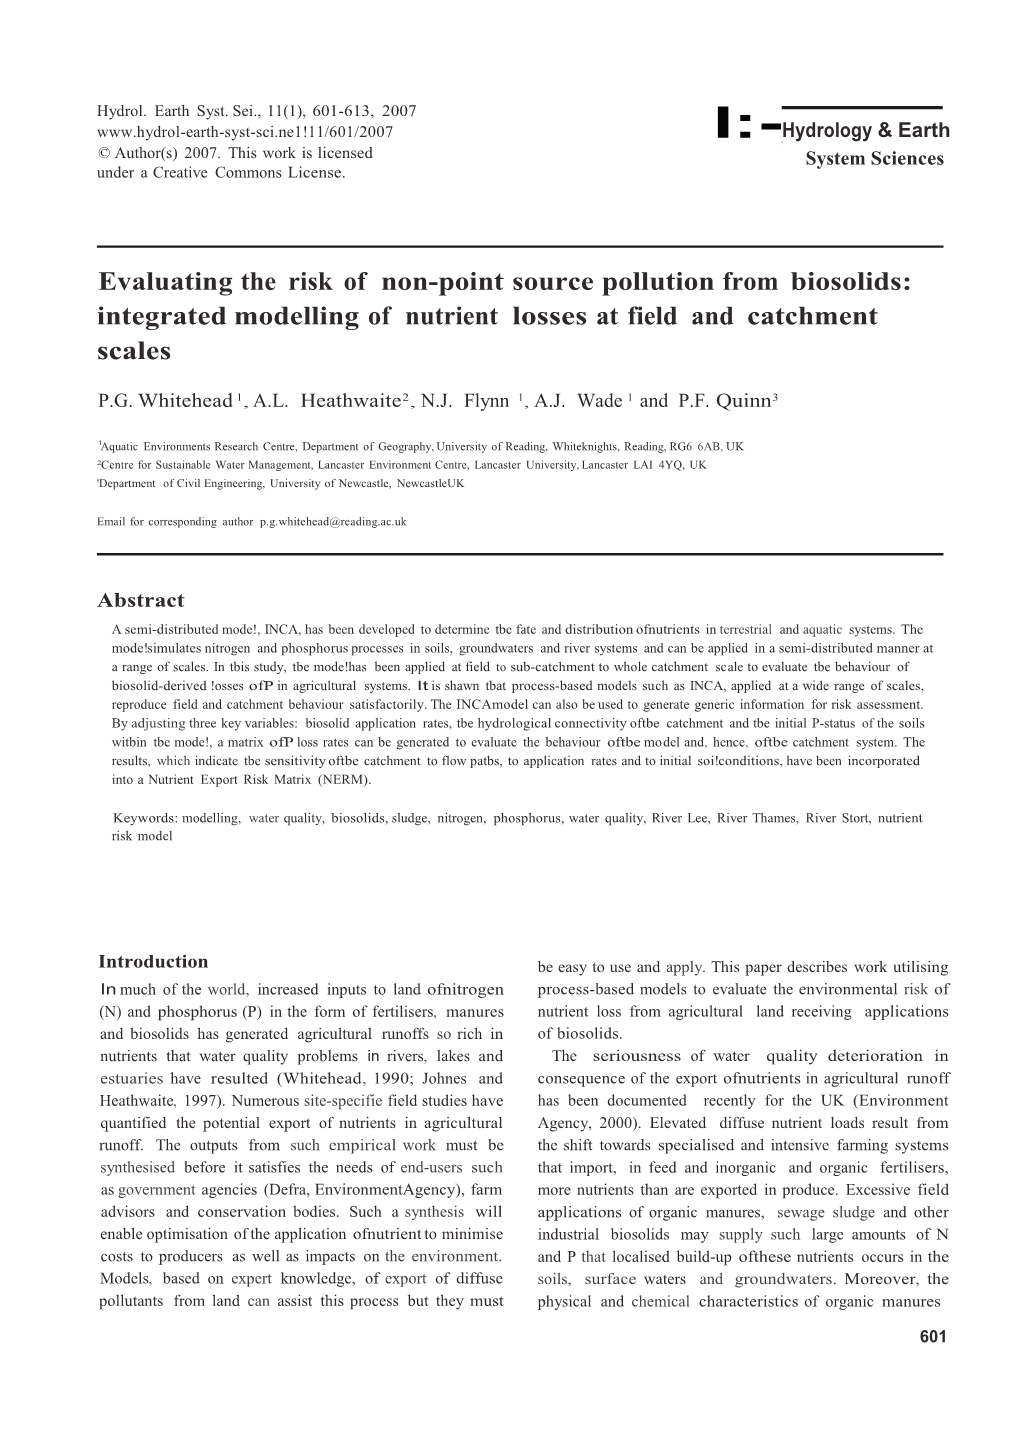 Evaluating the Risk of Non-Point Source Pollution from Biosolids: Integrated Modelling of Nutrient Losses at Field and Catchment Scales